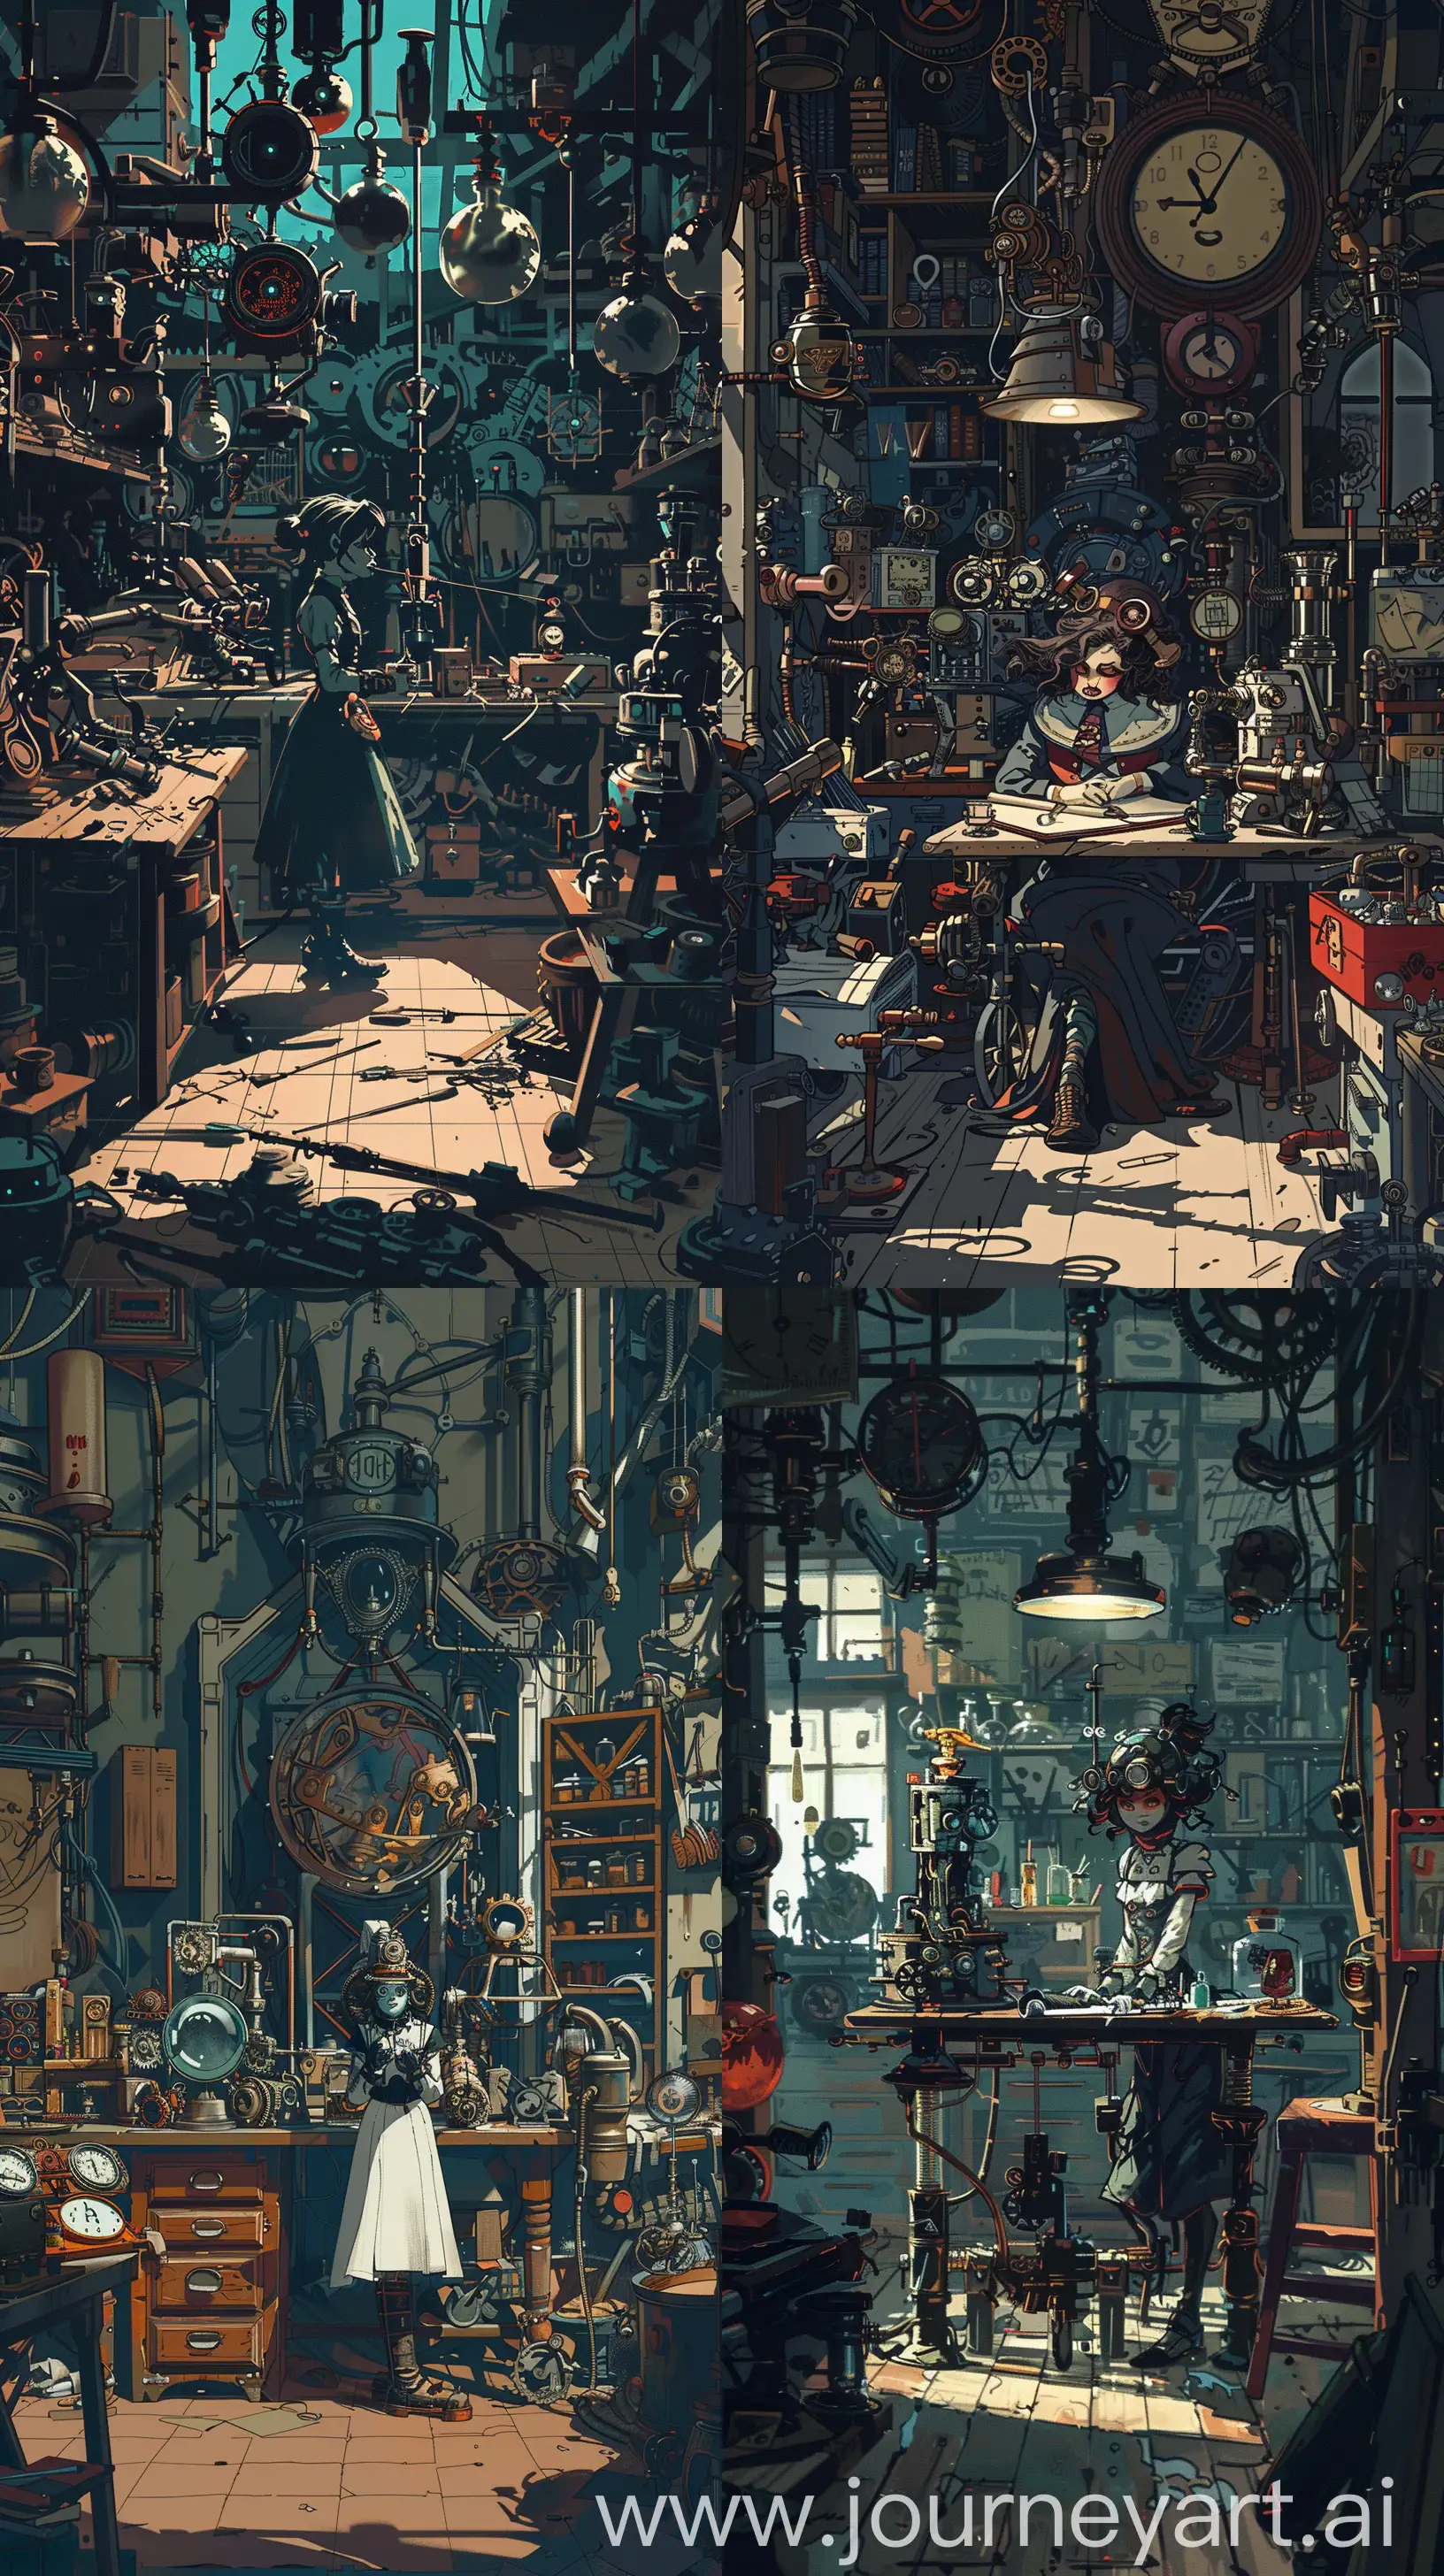  Depict a steampunk inventor in her workshop surrounded by quirky inventions and mechanical contraptions, rendered in Mignola's style. The character should have exaggerated proportions and the scene should be rich with intricate details in the shadows.,phone wallpaper 8k uhd Maximalist Details. --ar 9:16